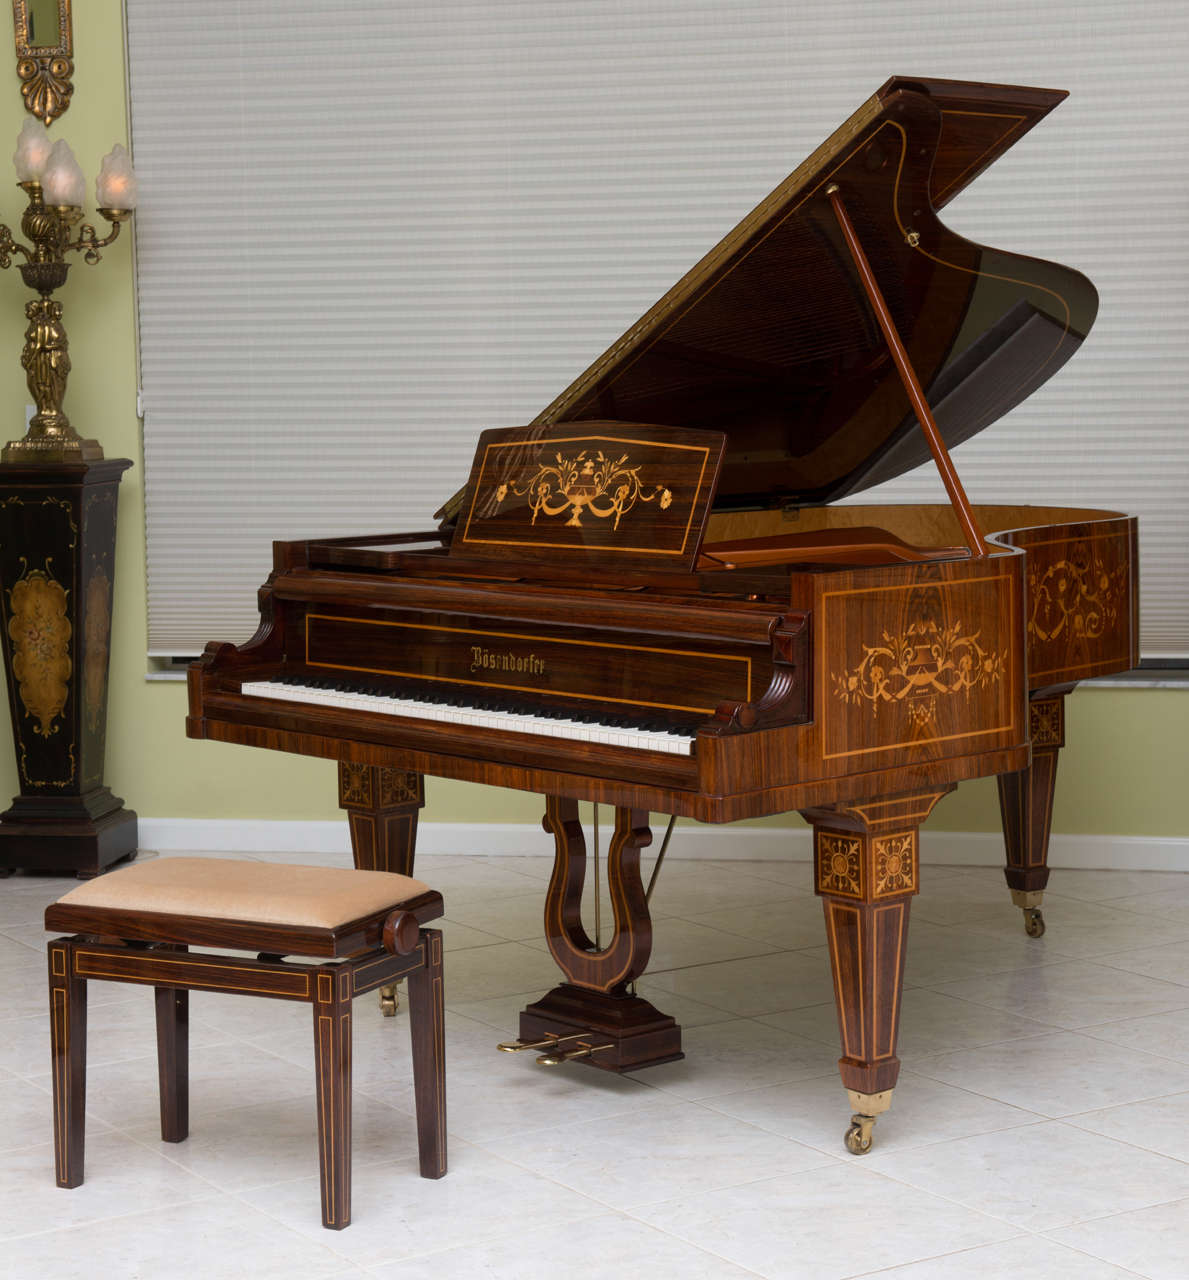 Provenance: The Vienna Opera House.
The exterior case in palisander, boxwood, lemonwood, satinwood, Amboyna, and birch including the piano lid, bridge and lyre.
The interior case in custom sapelli veneer.
The entire piano underwent a meticulous